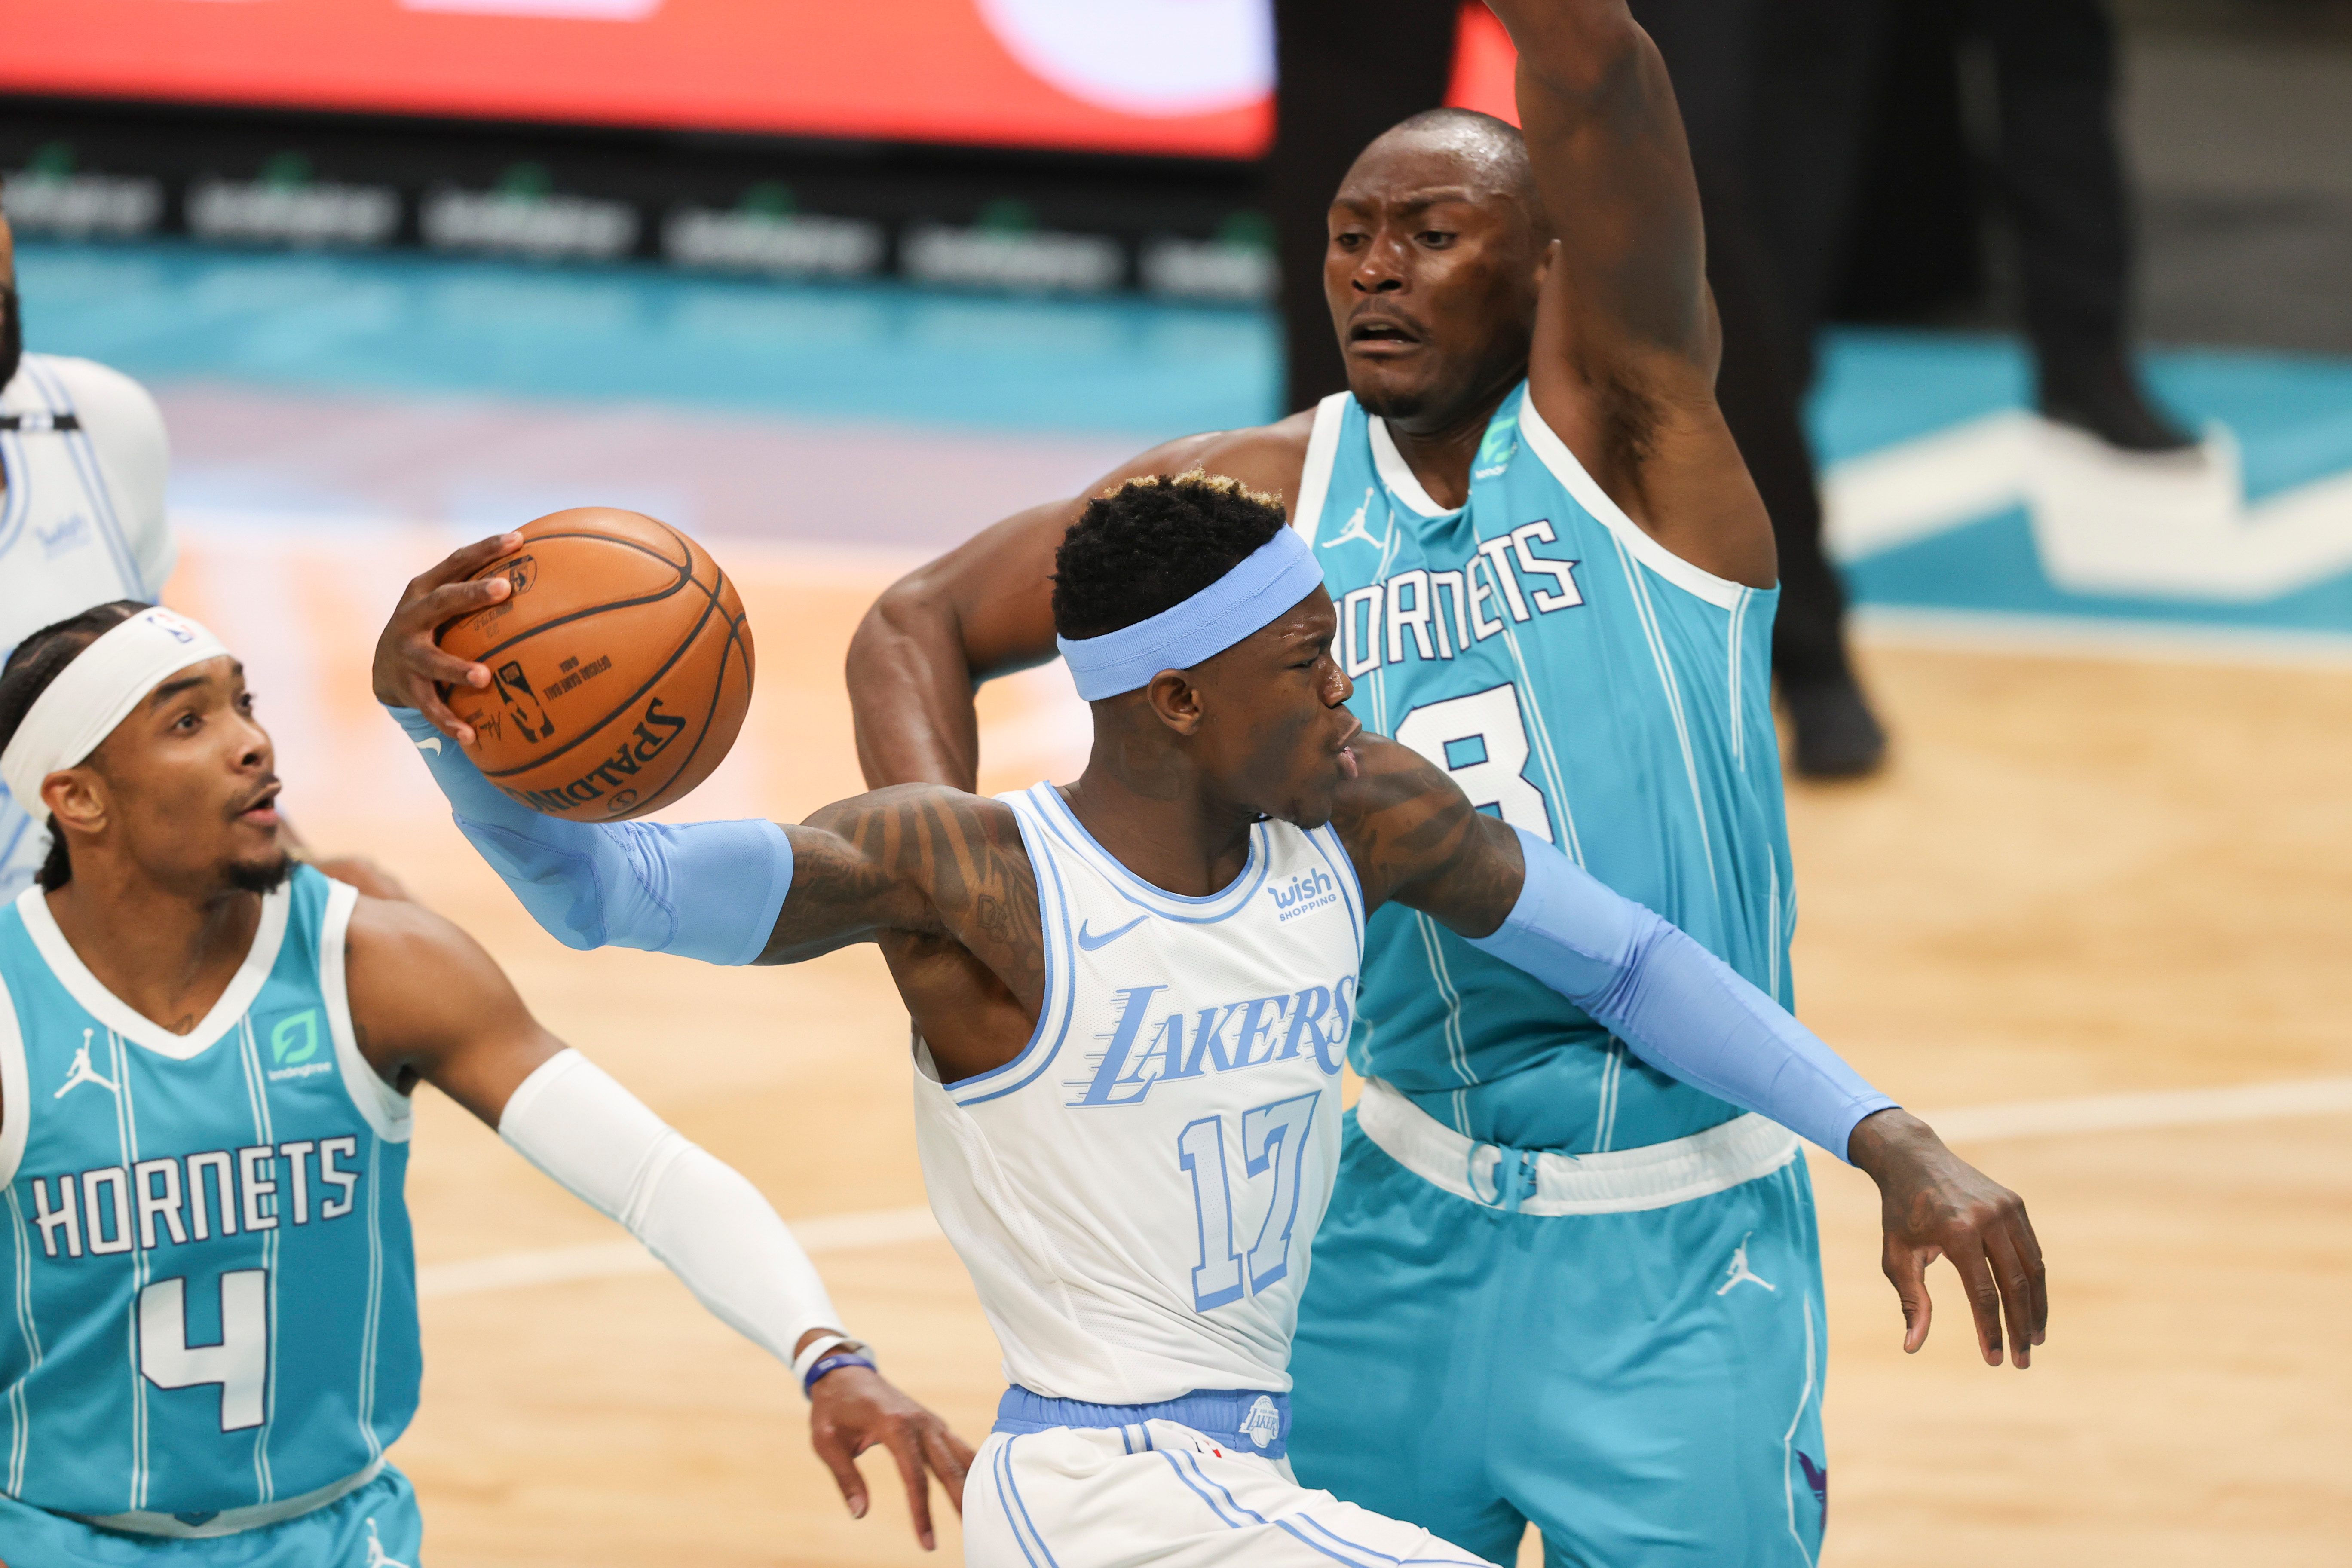 Lakers end road trip with win over Hornets